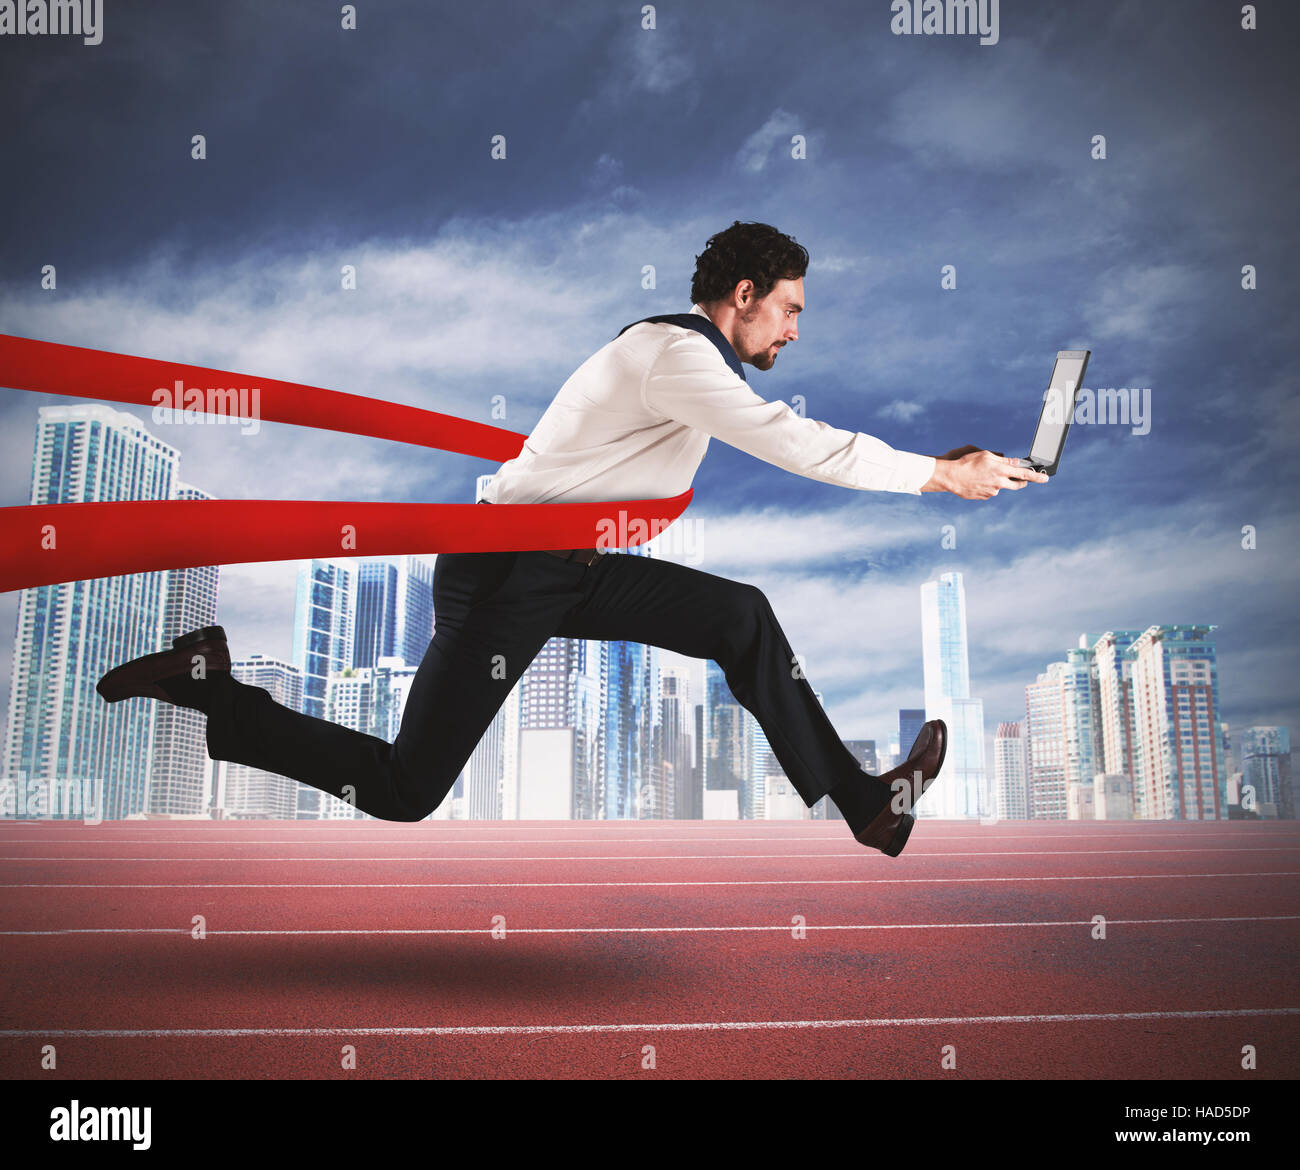 Successful businessman in a finishing line Stock Photo